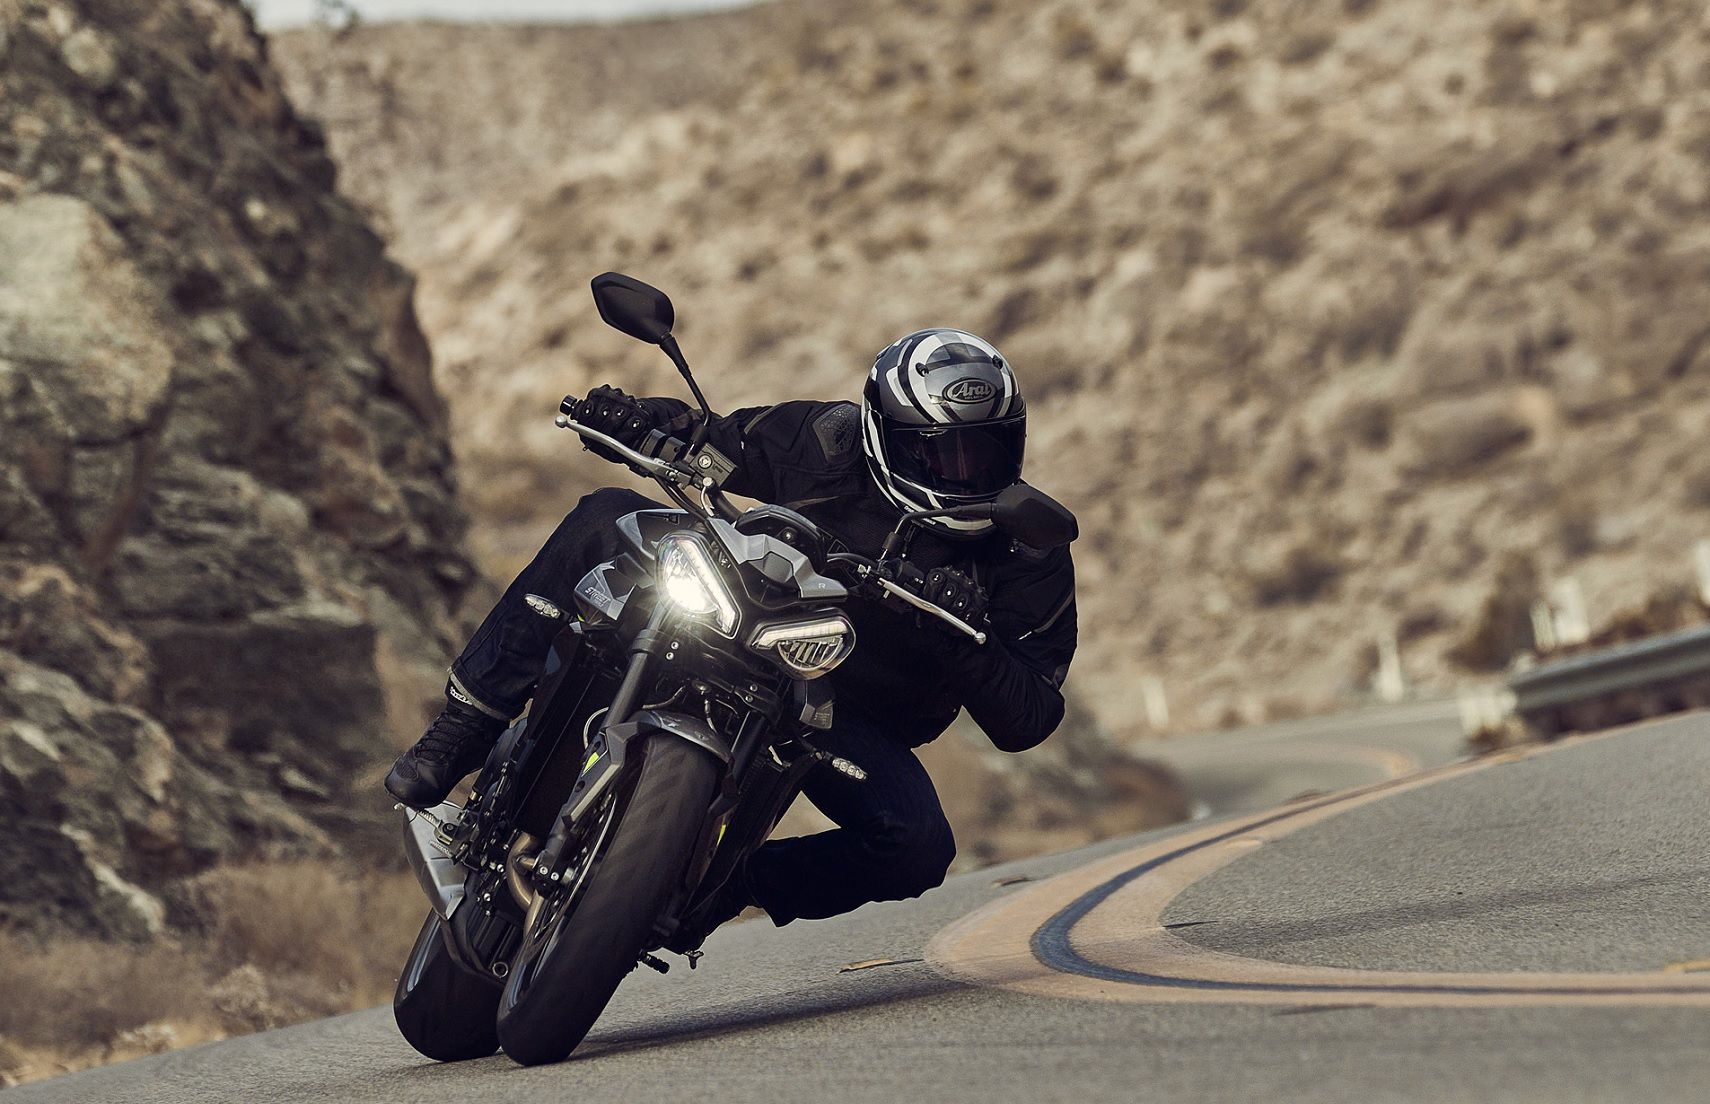 The New 2023 Triumph Street Triple Line-Up Adds Triple The Fun